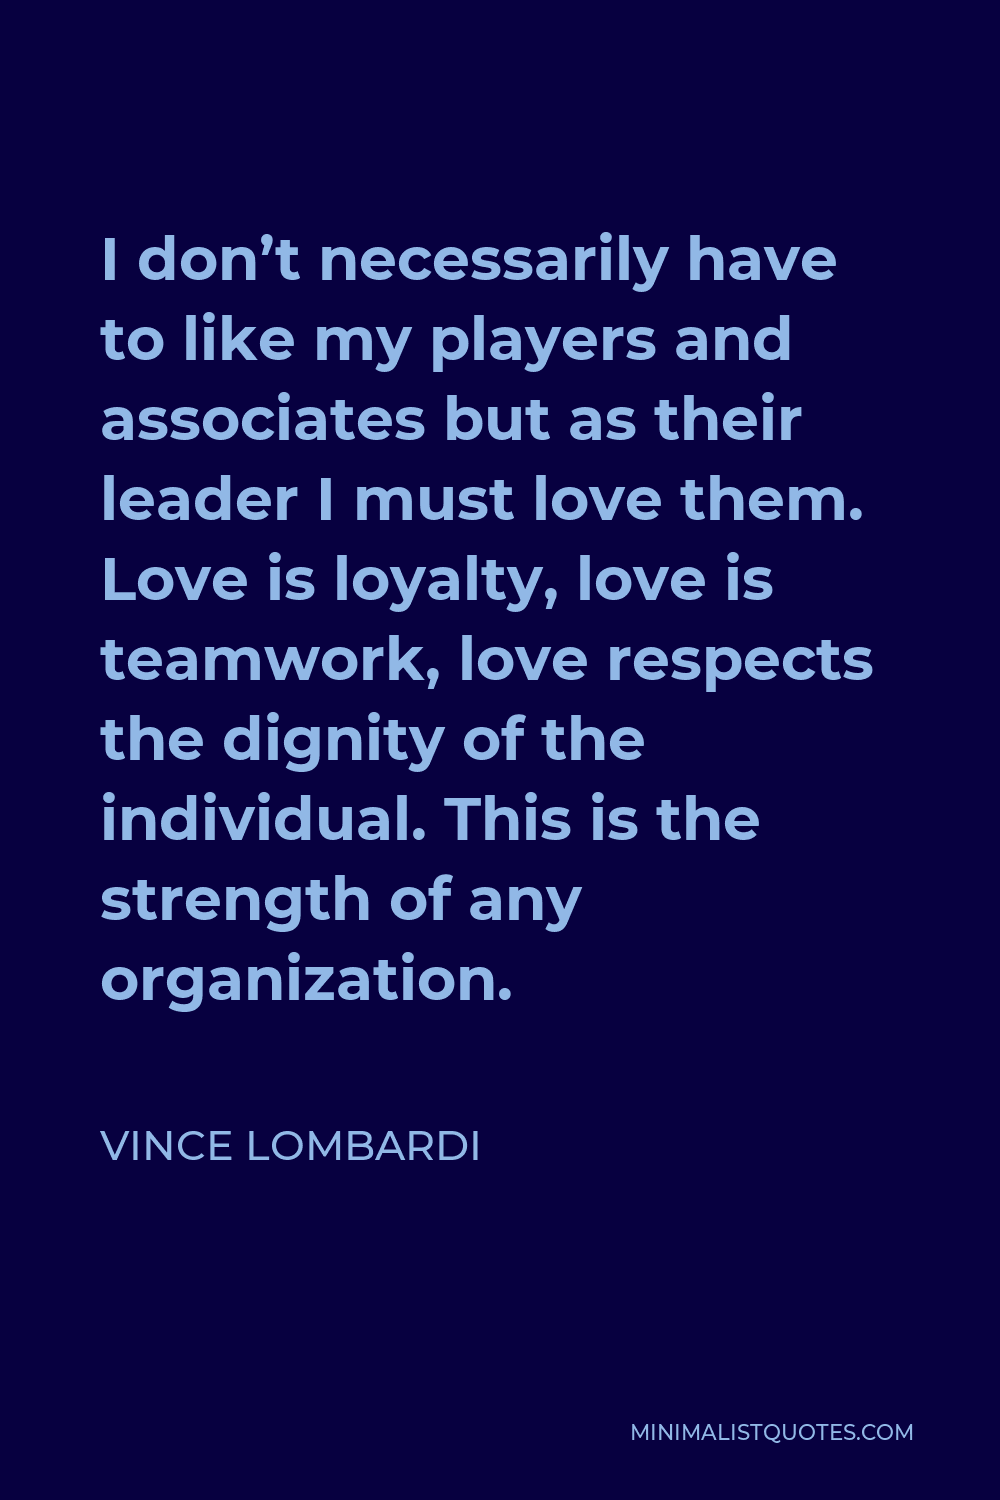 Vince Lombardi Quote - I don’t necessarily have to like my players and associates but as their leader I must love them. Love is loyalty, love is teamwork, love respects the dignity of the individual. This is the strength of any organization.